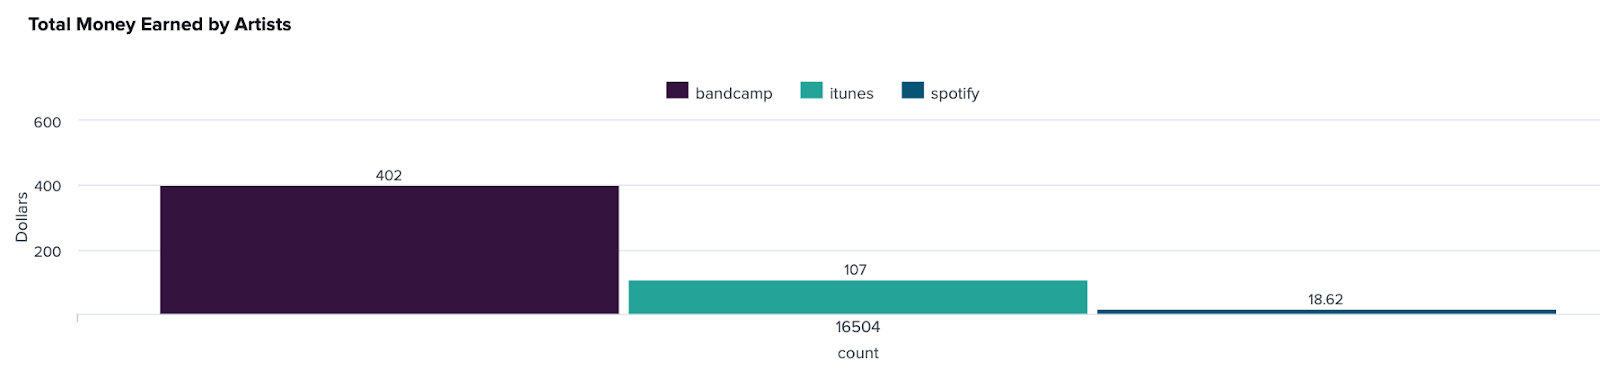 A rough estimate of how much money artists earned from my music consumption, with $402 dollars going to artists from bandcamp, $107 going to artists and labels from itunes, and 18.62 going to artists on spotify, assuming that I listened to all of my music on spotify.